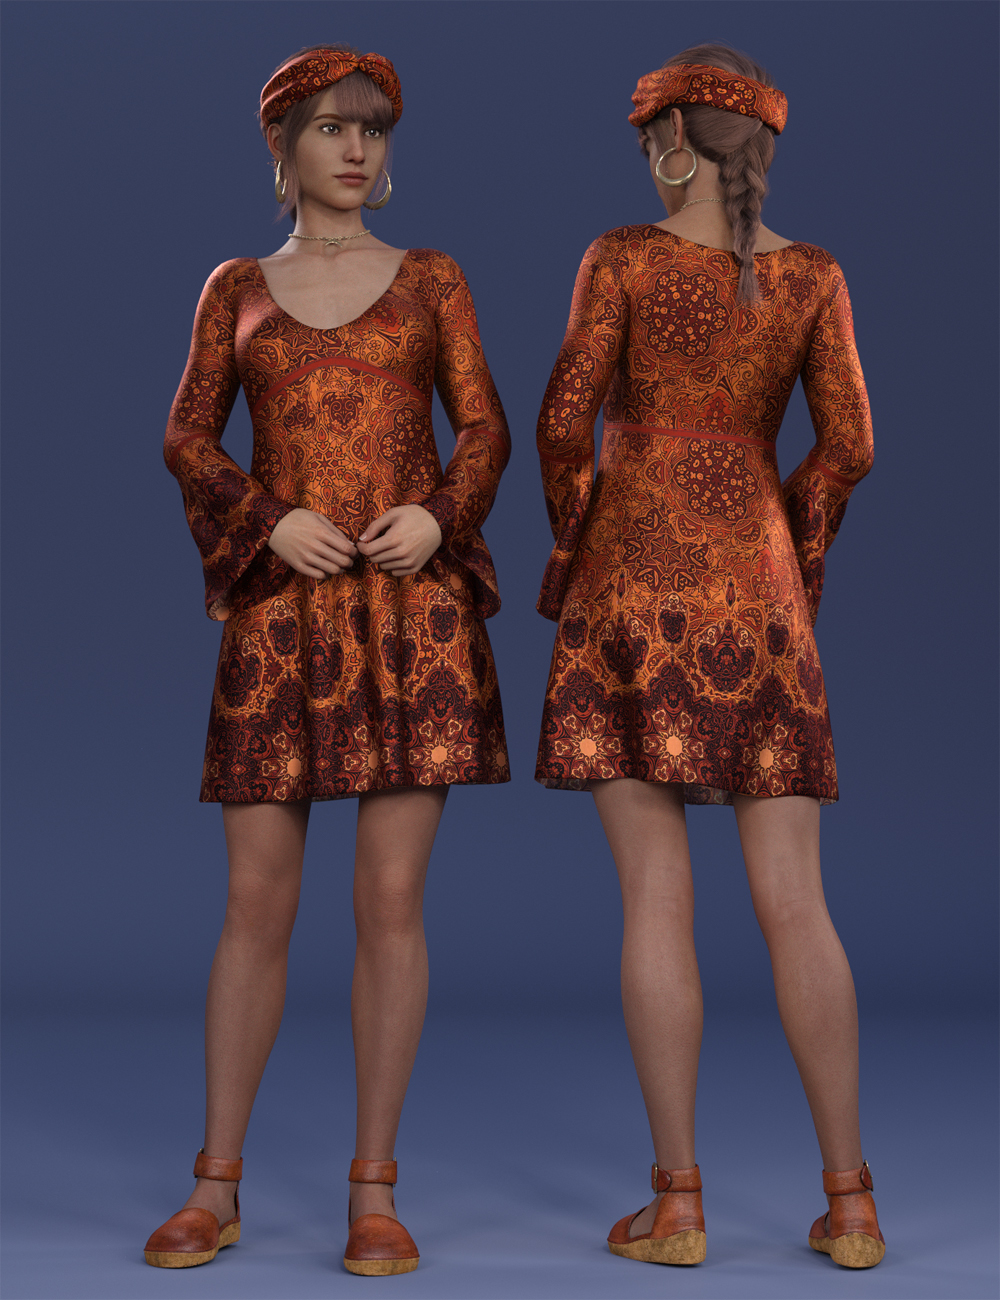 dForce Flower Girl Dress Outfit for Genesis 8 and 8.1 Females